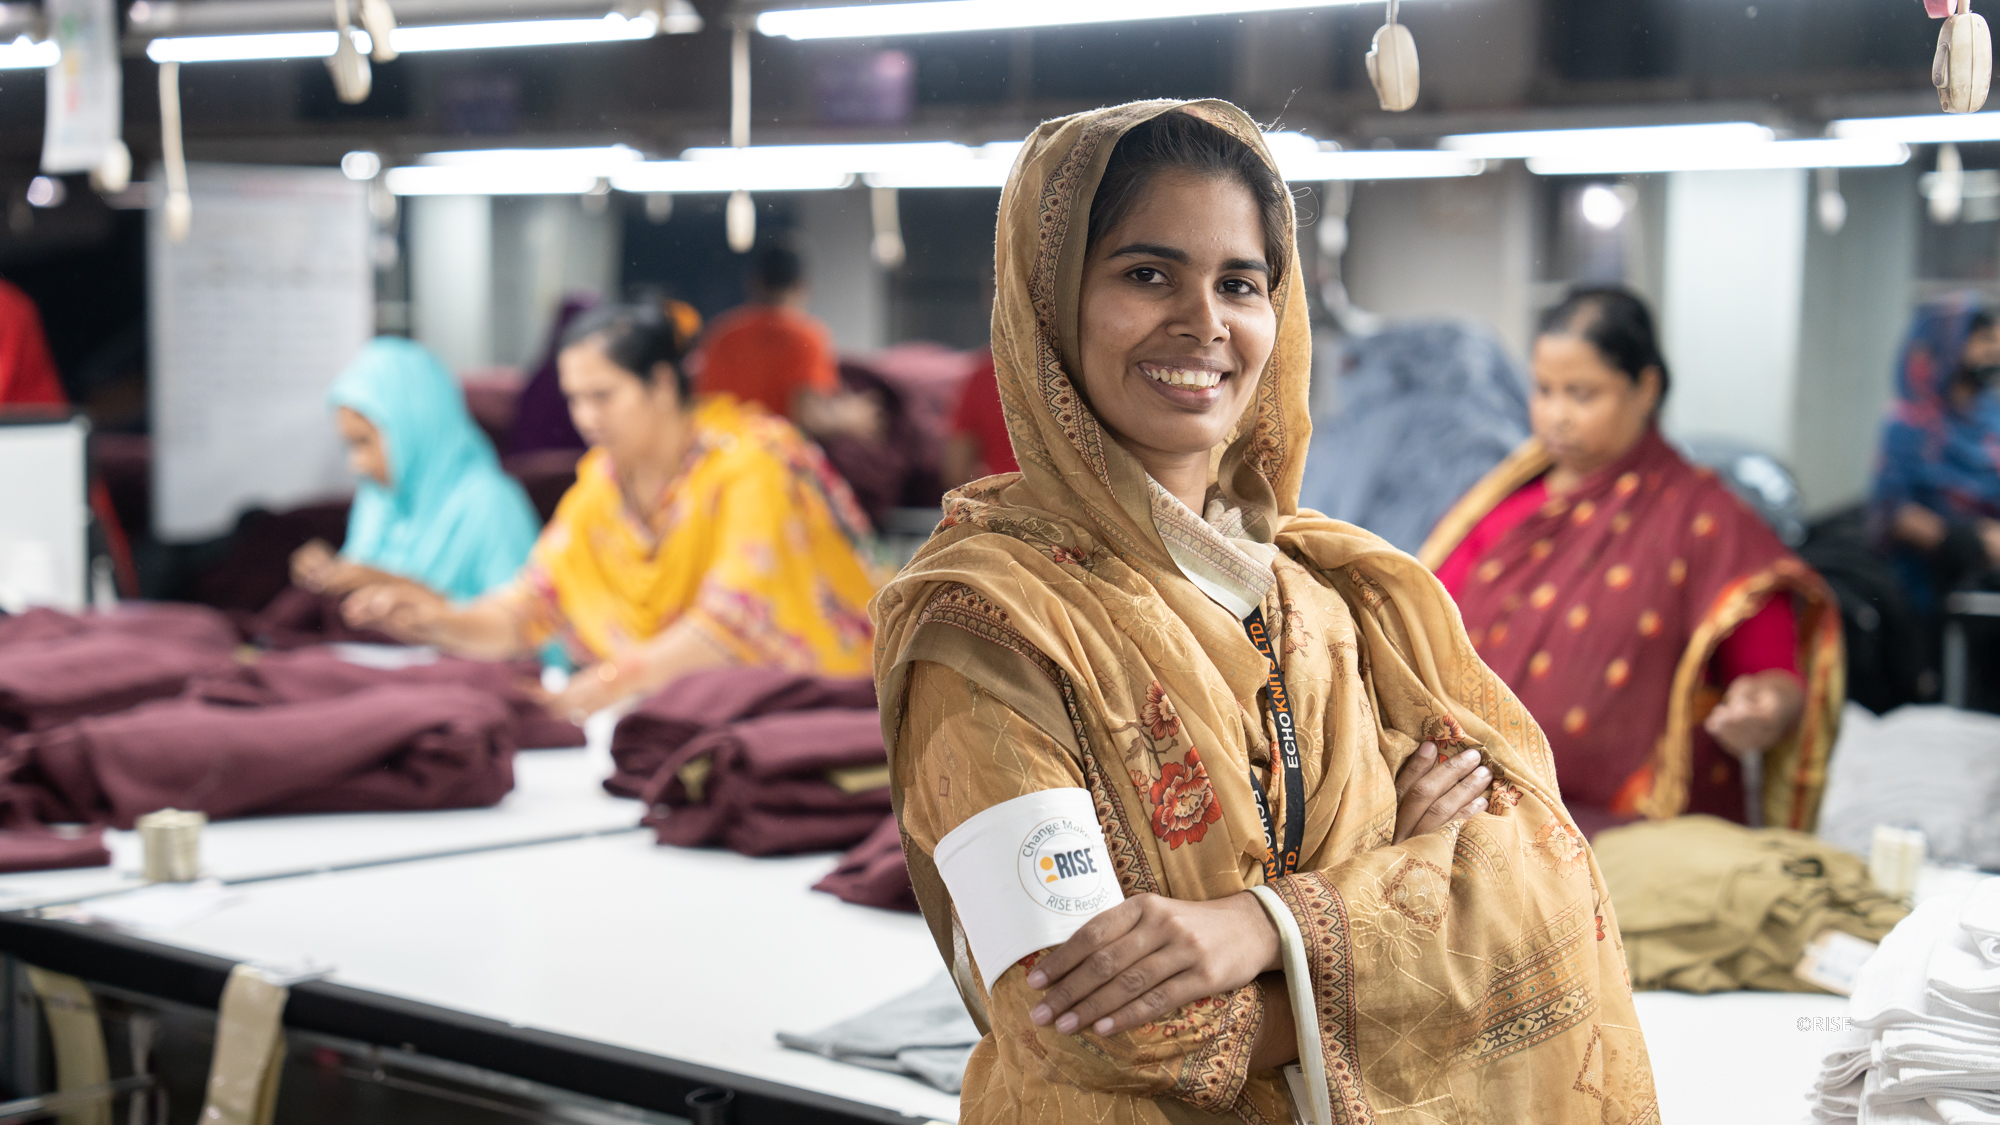 RISE welcomes suppliers in its drive for gender equality in global garment supply chains Hero Image